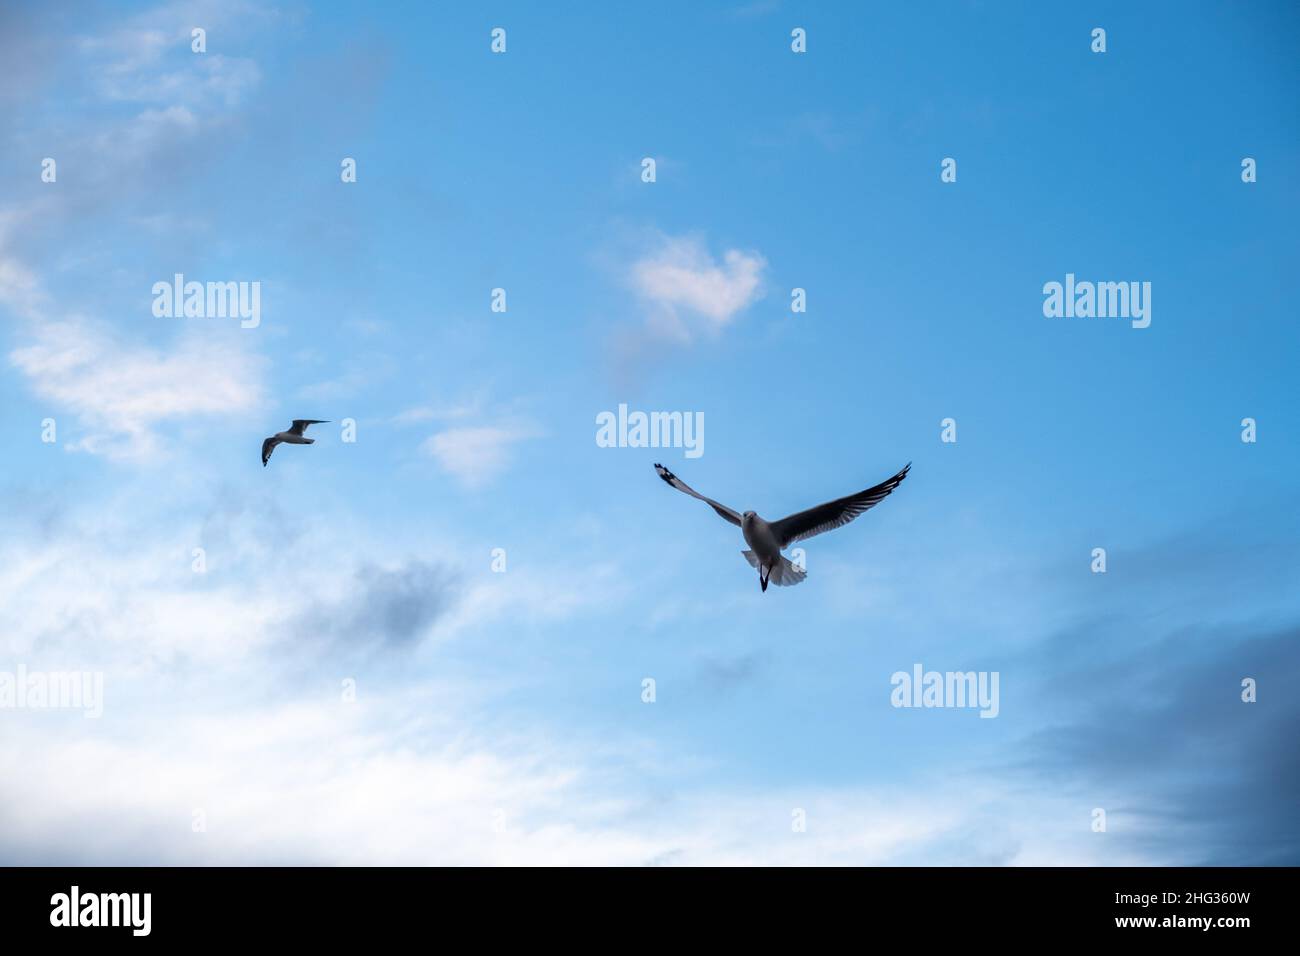 Looking up at seagulls flying in the blue sky at sunset with text space Stock Photo